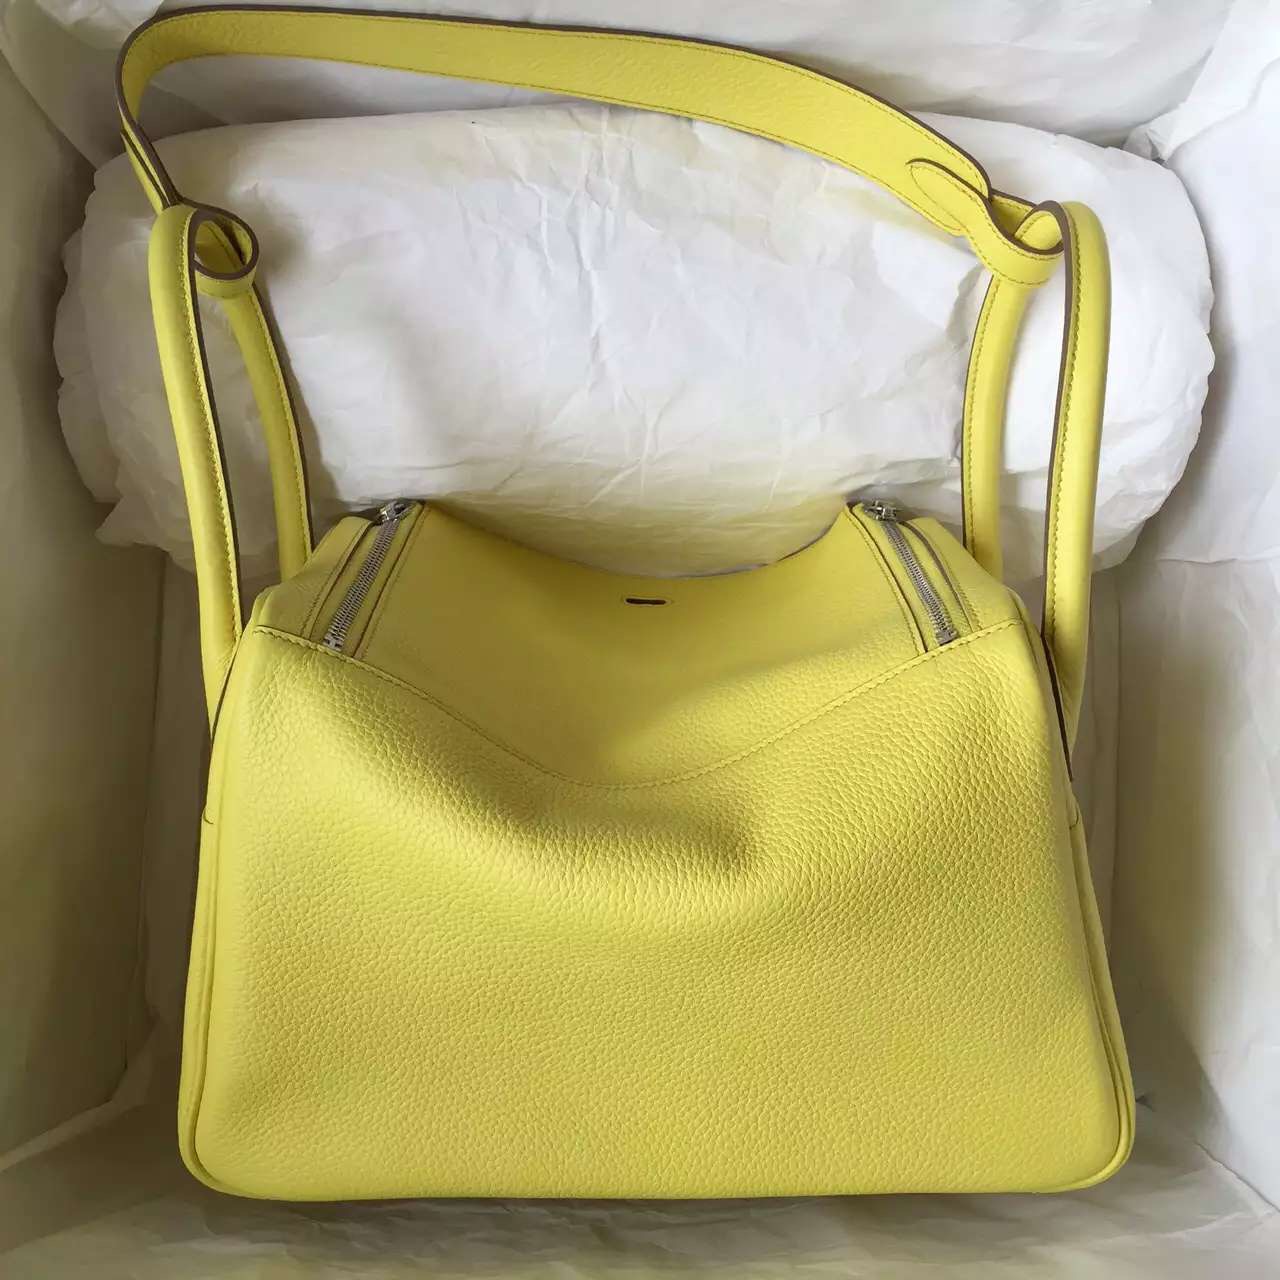 Hermes Togo Calfskin Leather Lindy Bag in C9 Yellow Silver Hardware 30CM